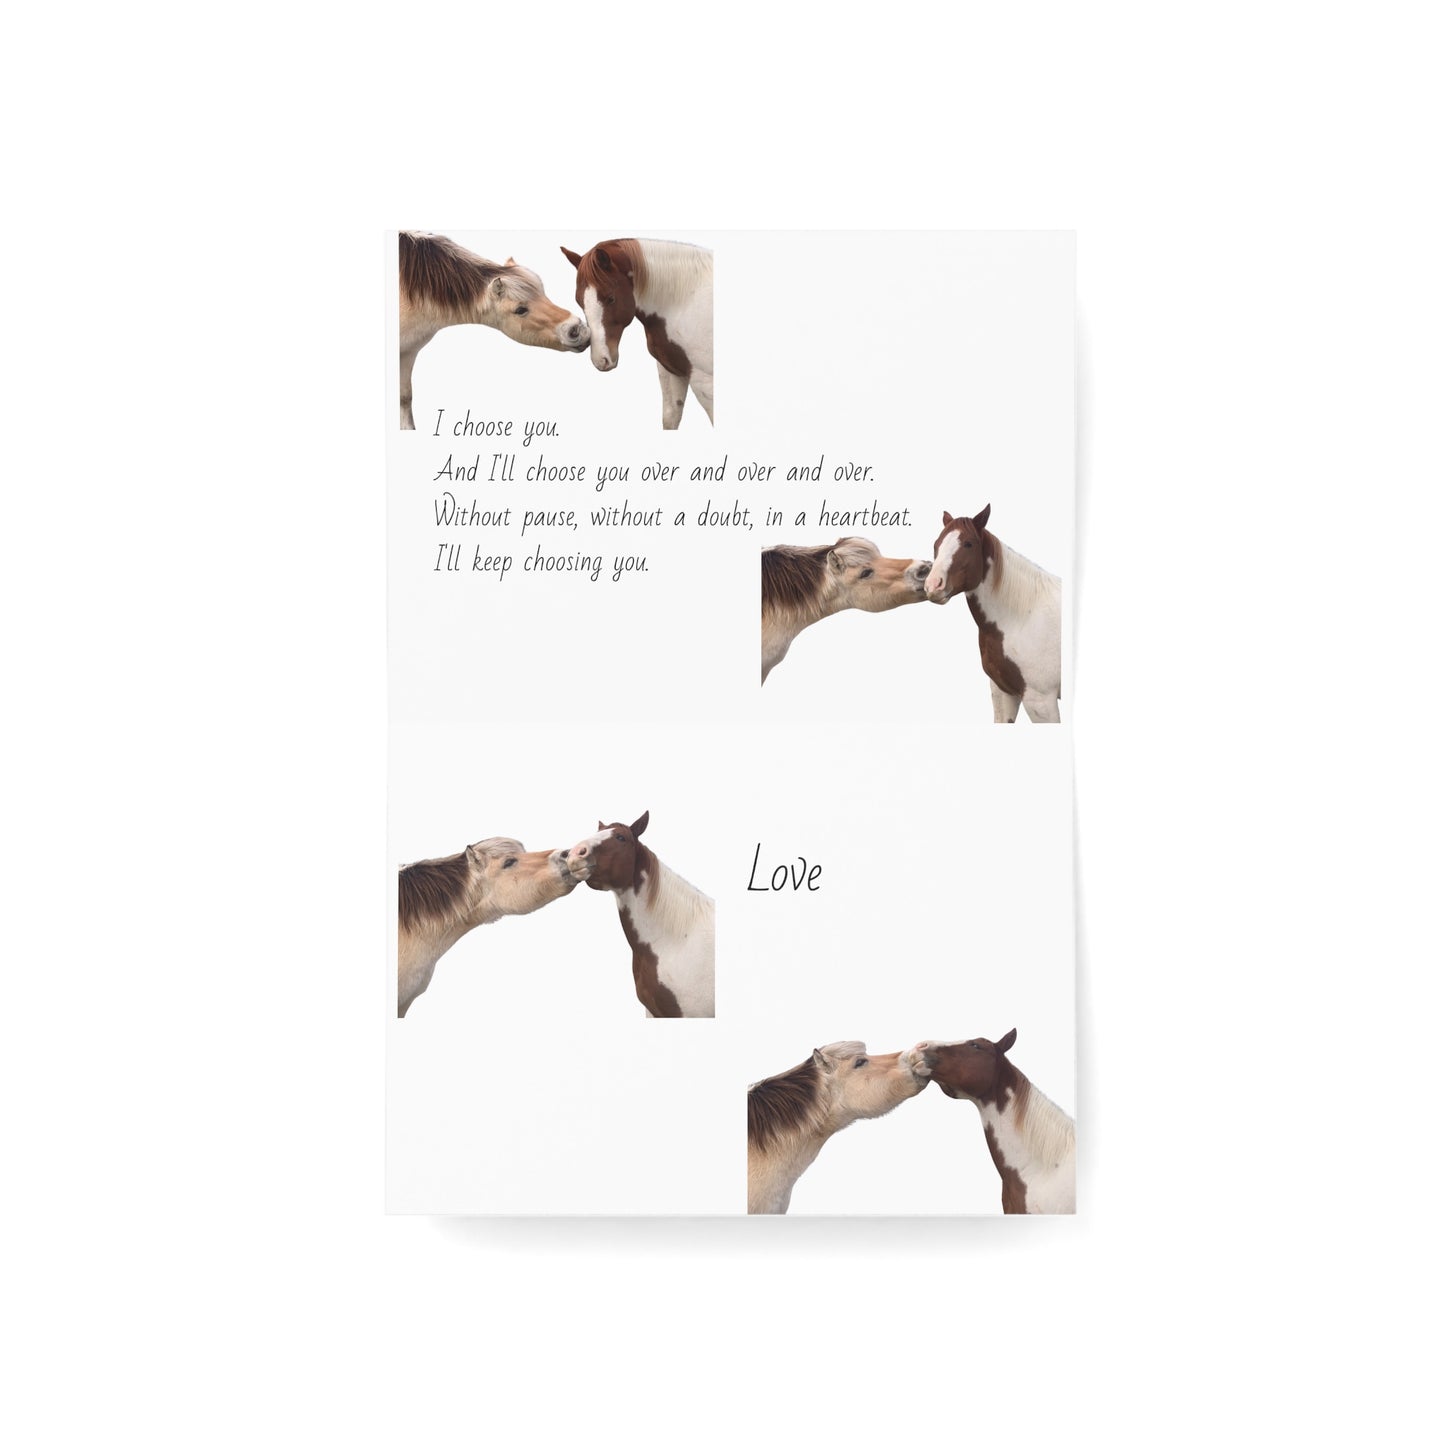 Thunder Cecil Greeting Cards (1, 10, 30, and 50pcs)